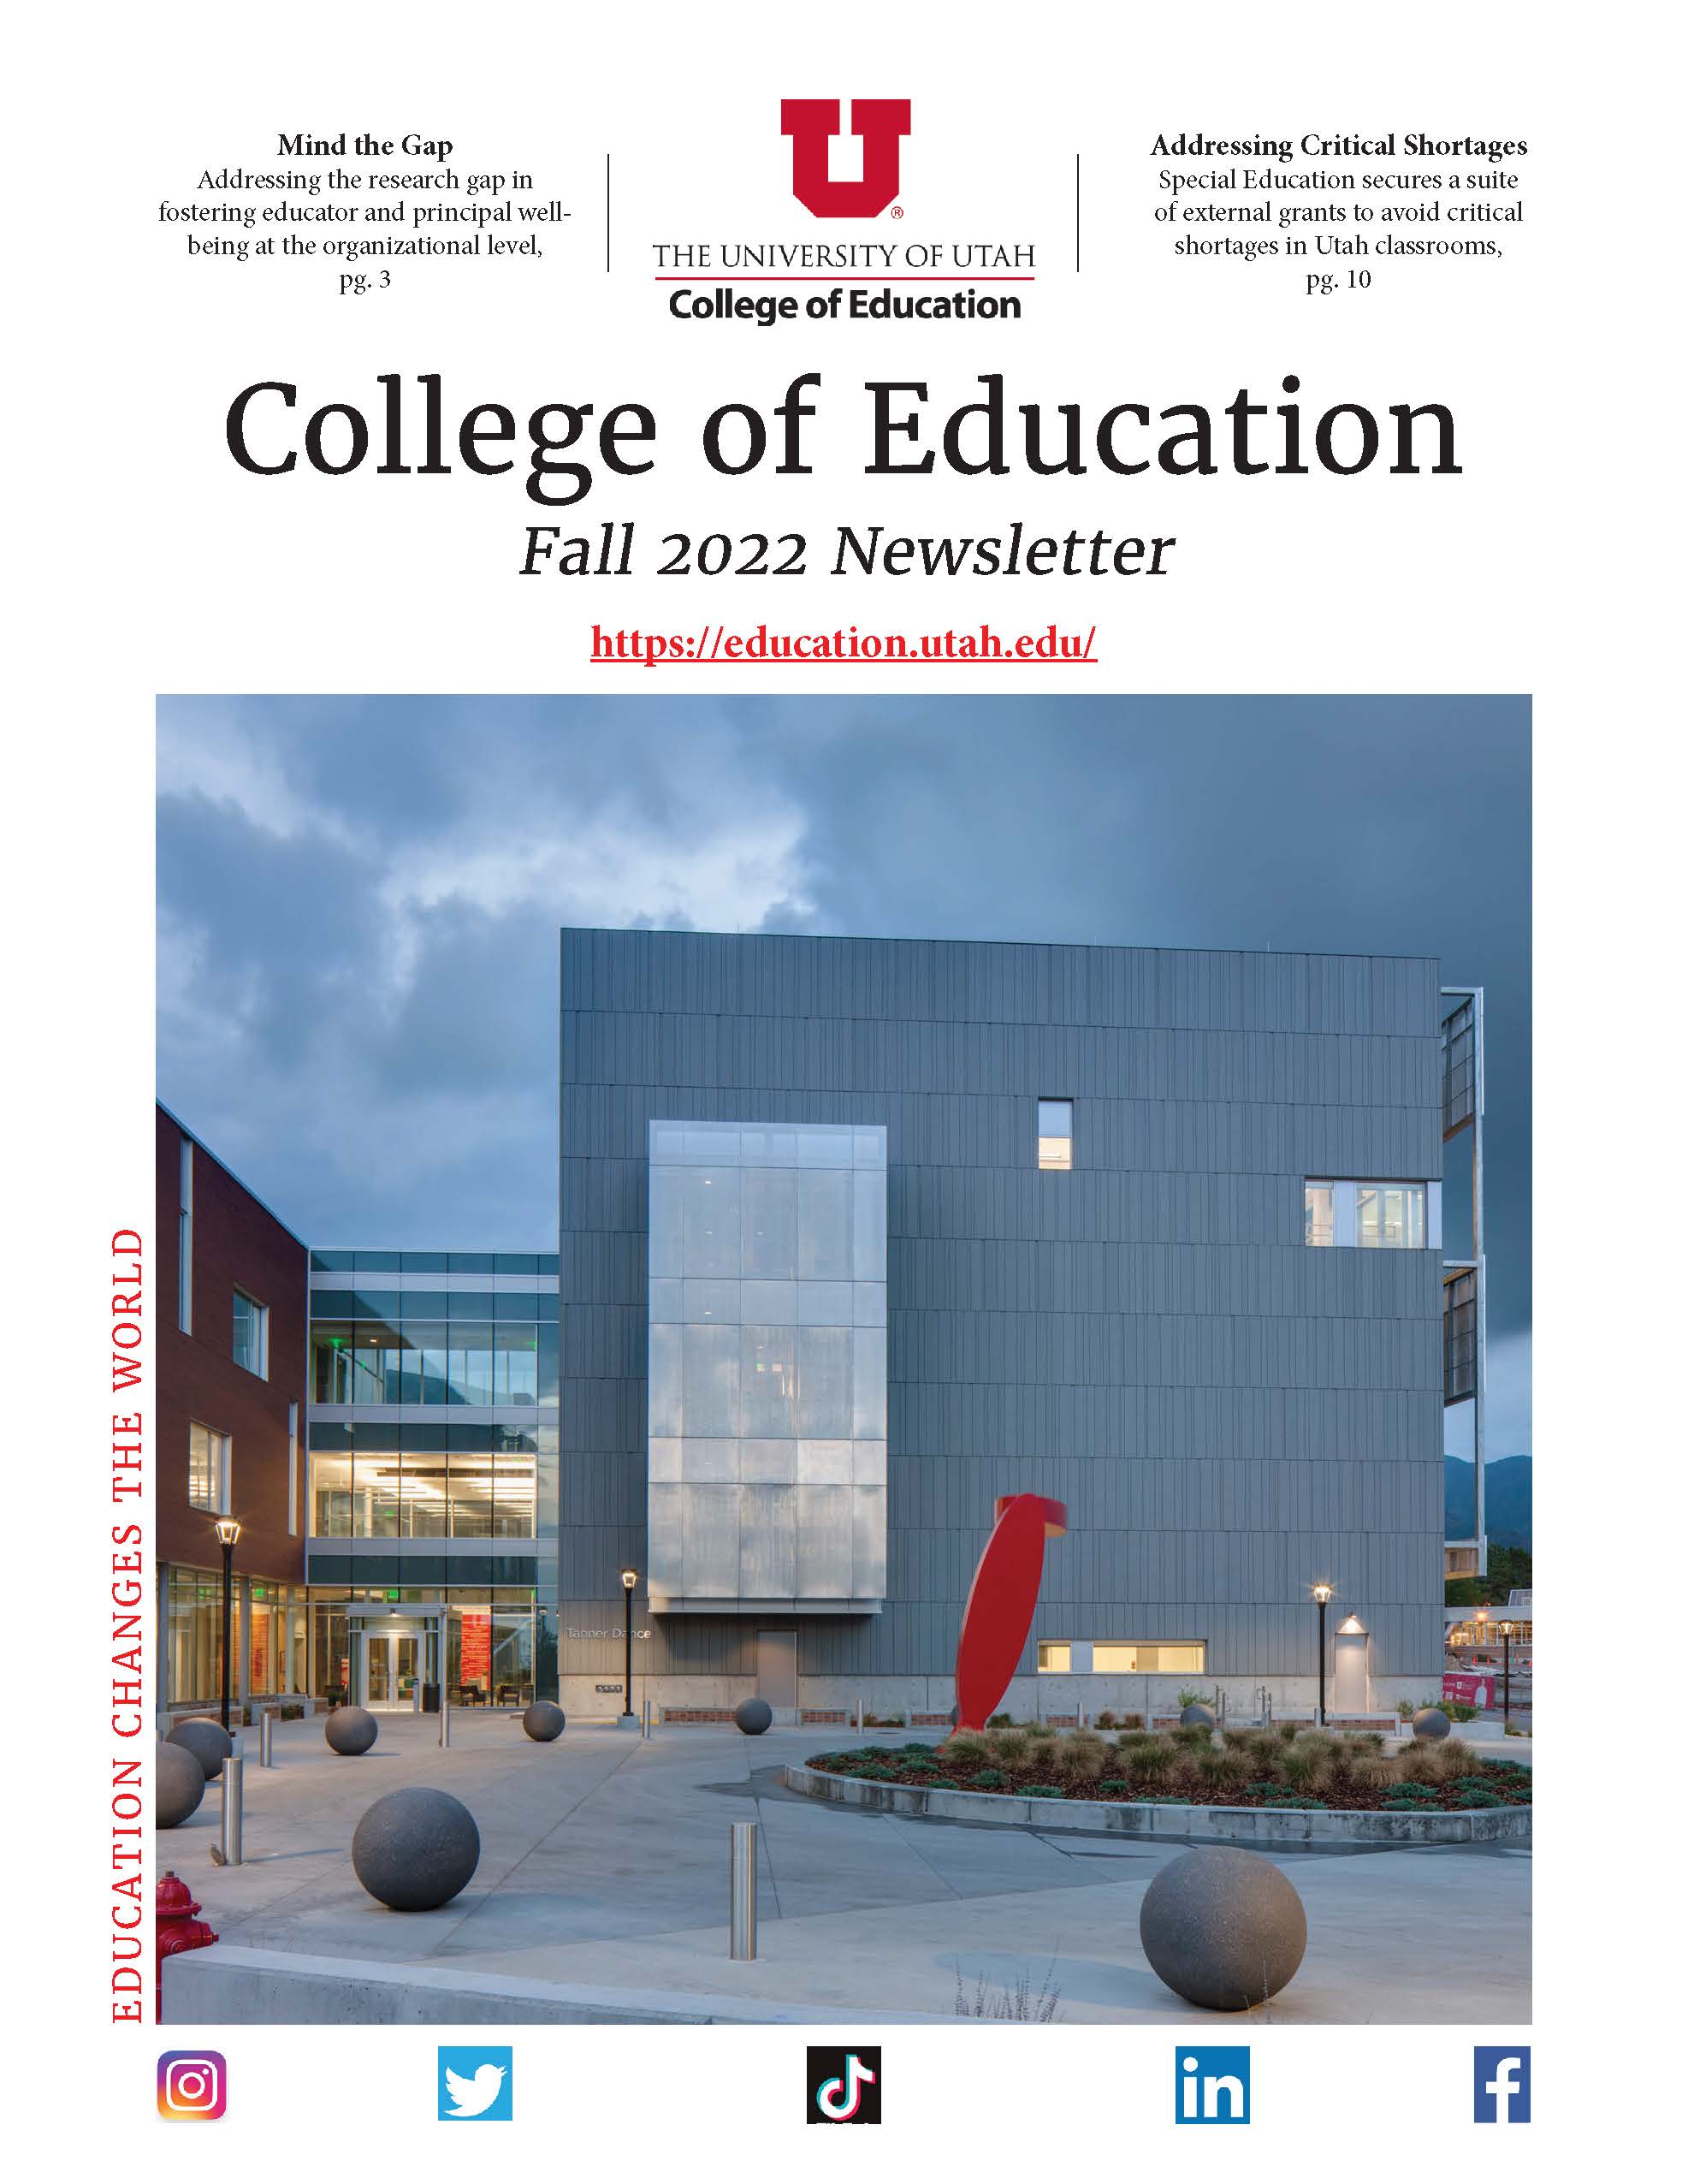 A cover of the Fall 2022 Newsletter